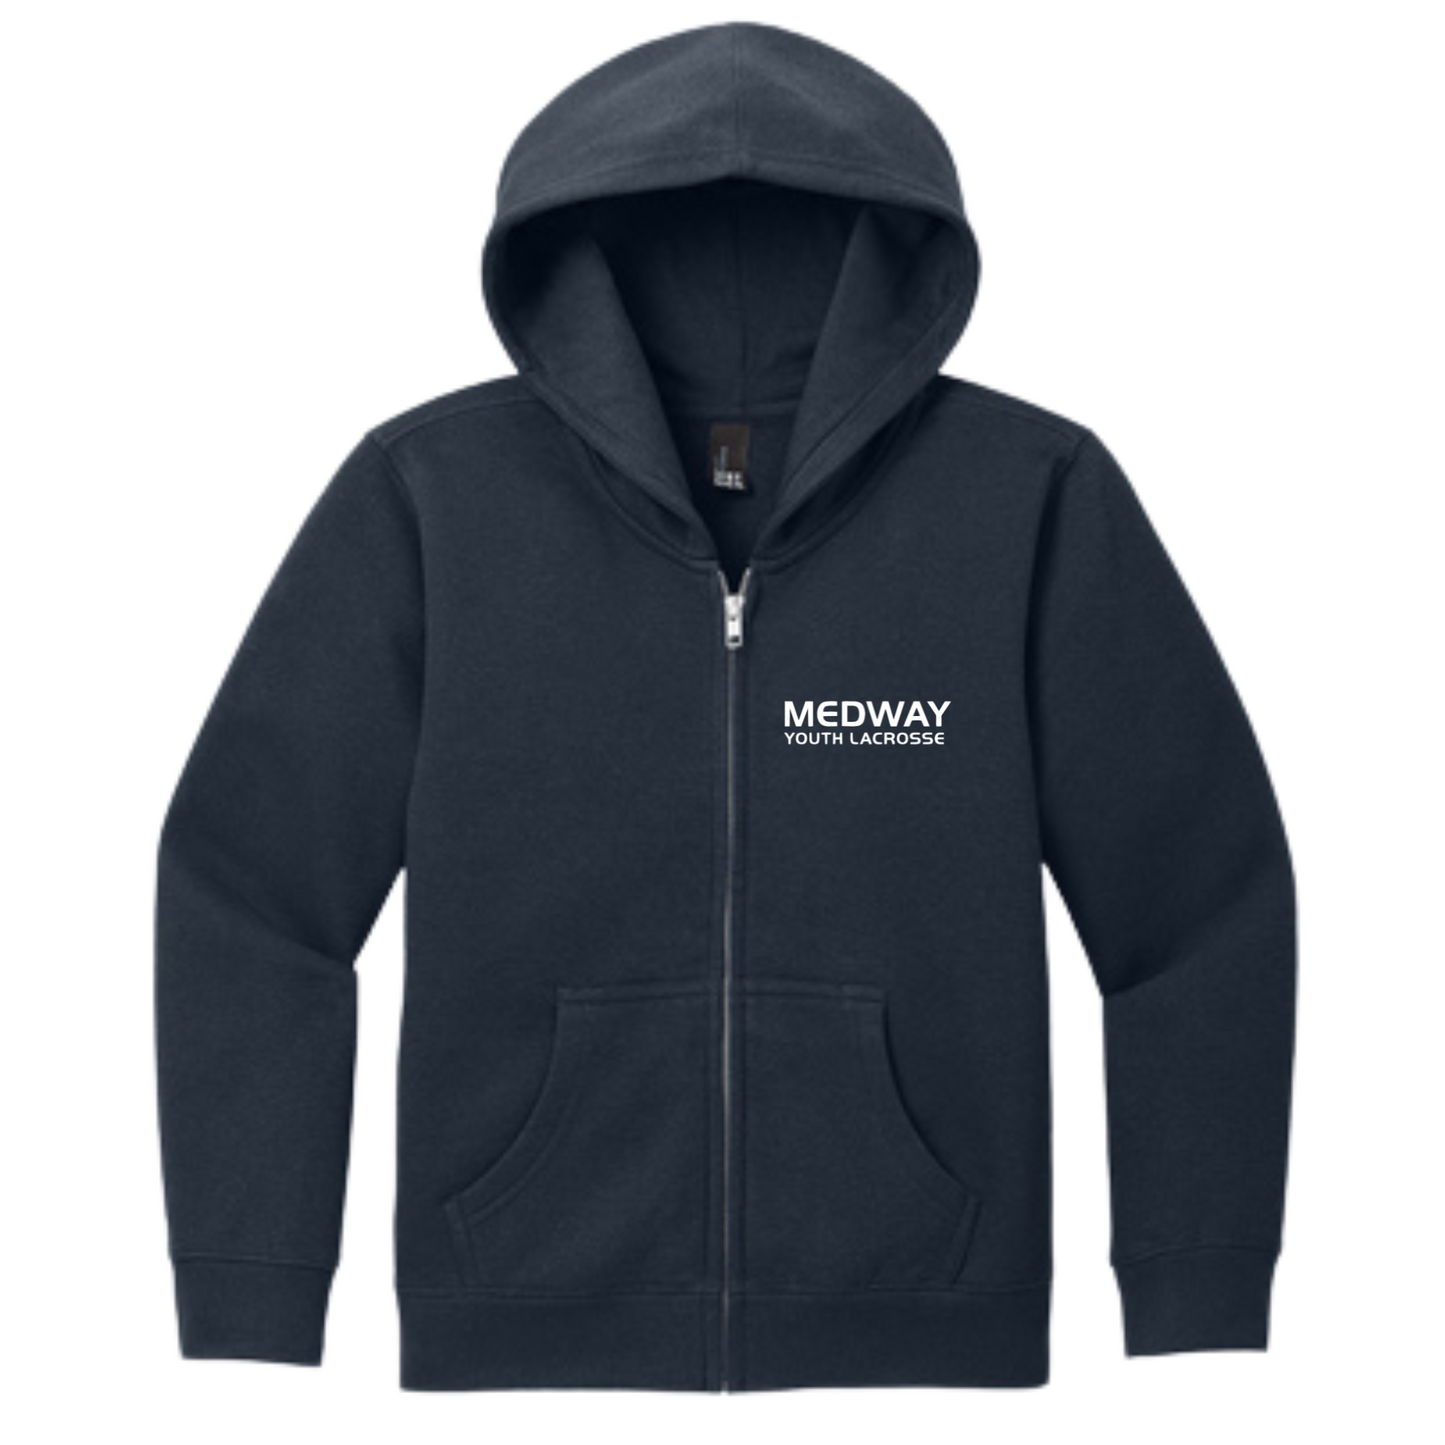 MEDWAY YOUTH LACROSSE YOUTH FULL ZIP HOODIE - NAVY